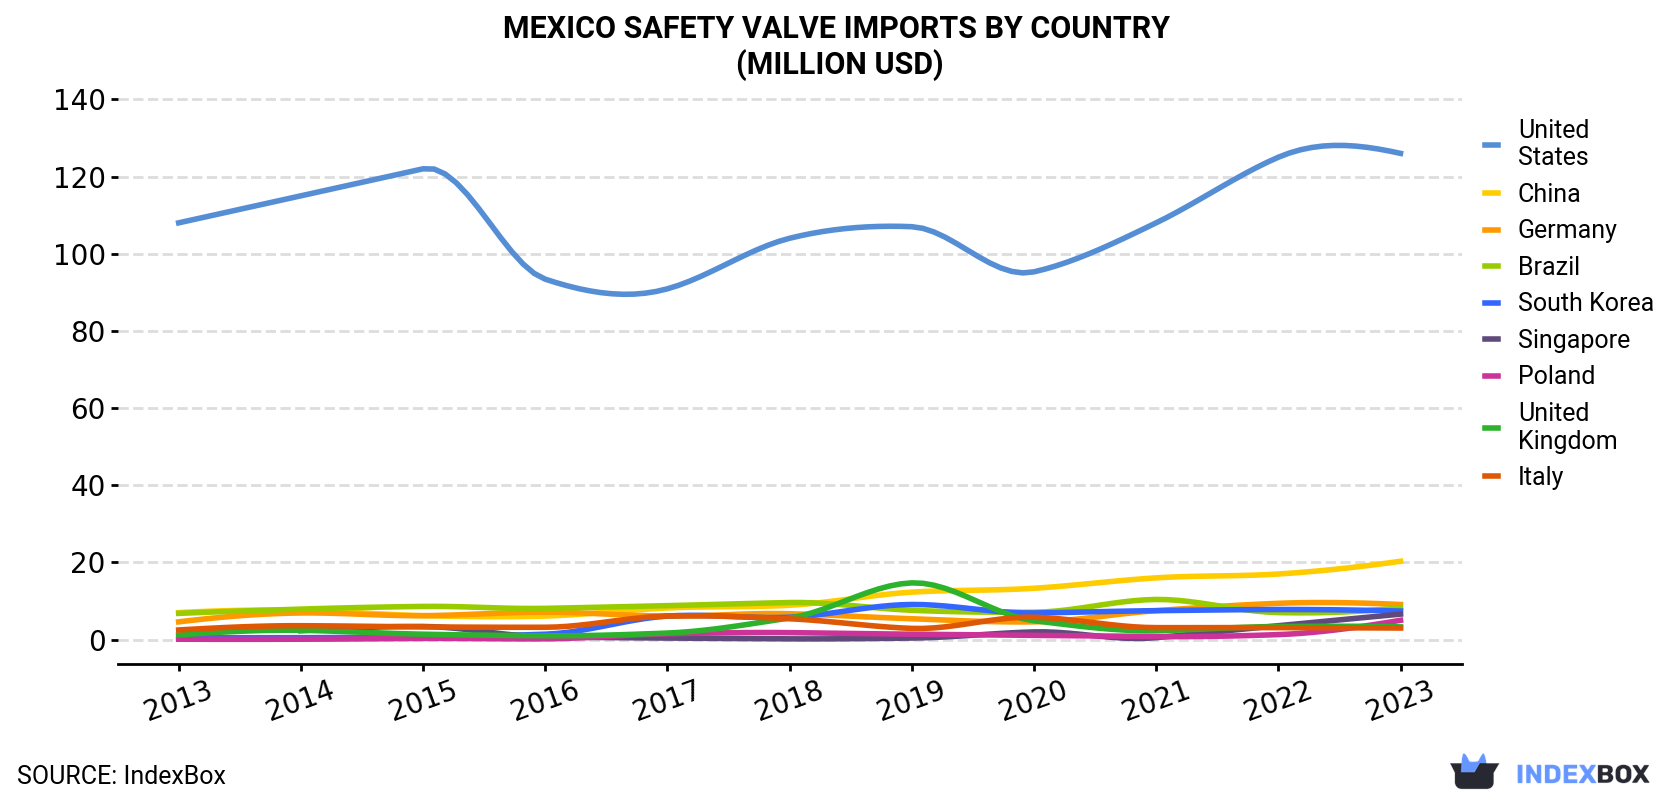 Mexico Safety Valve Imports By Country (Million USD)